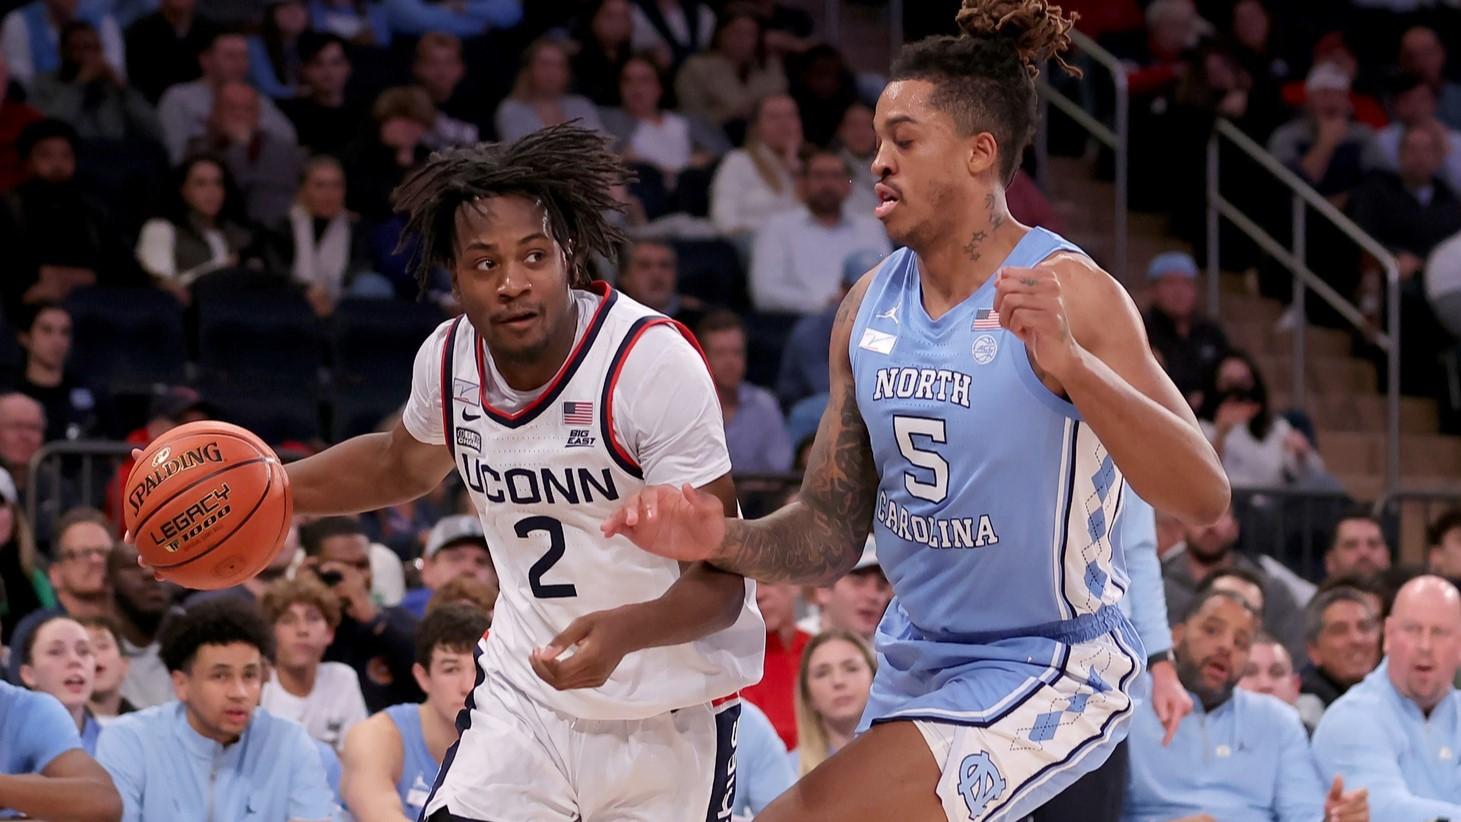 Dec 5, 2023; New York, New York, USA; Connecticut Huskies guard Tristen Newton (2) controls the ball against North Carolina Tar Heels forward Armando Bacot (5) during the first half at Madison Square Garden. / Brad Penner-USA TODAY Sports